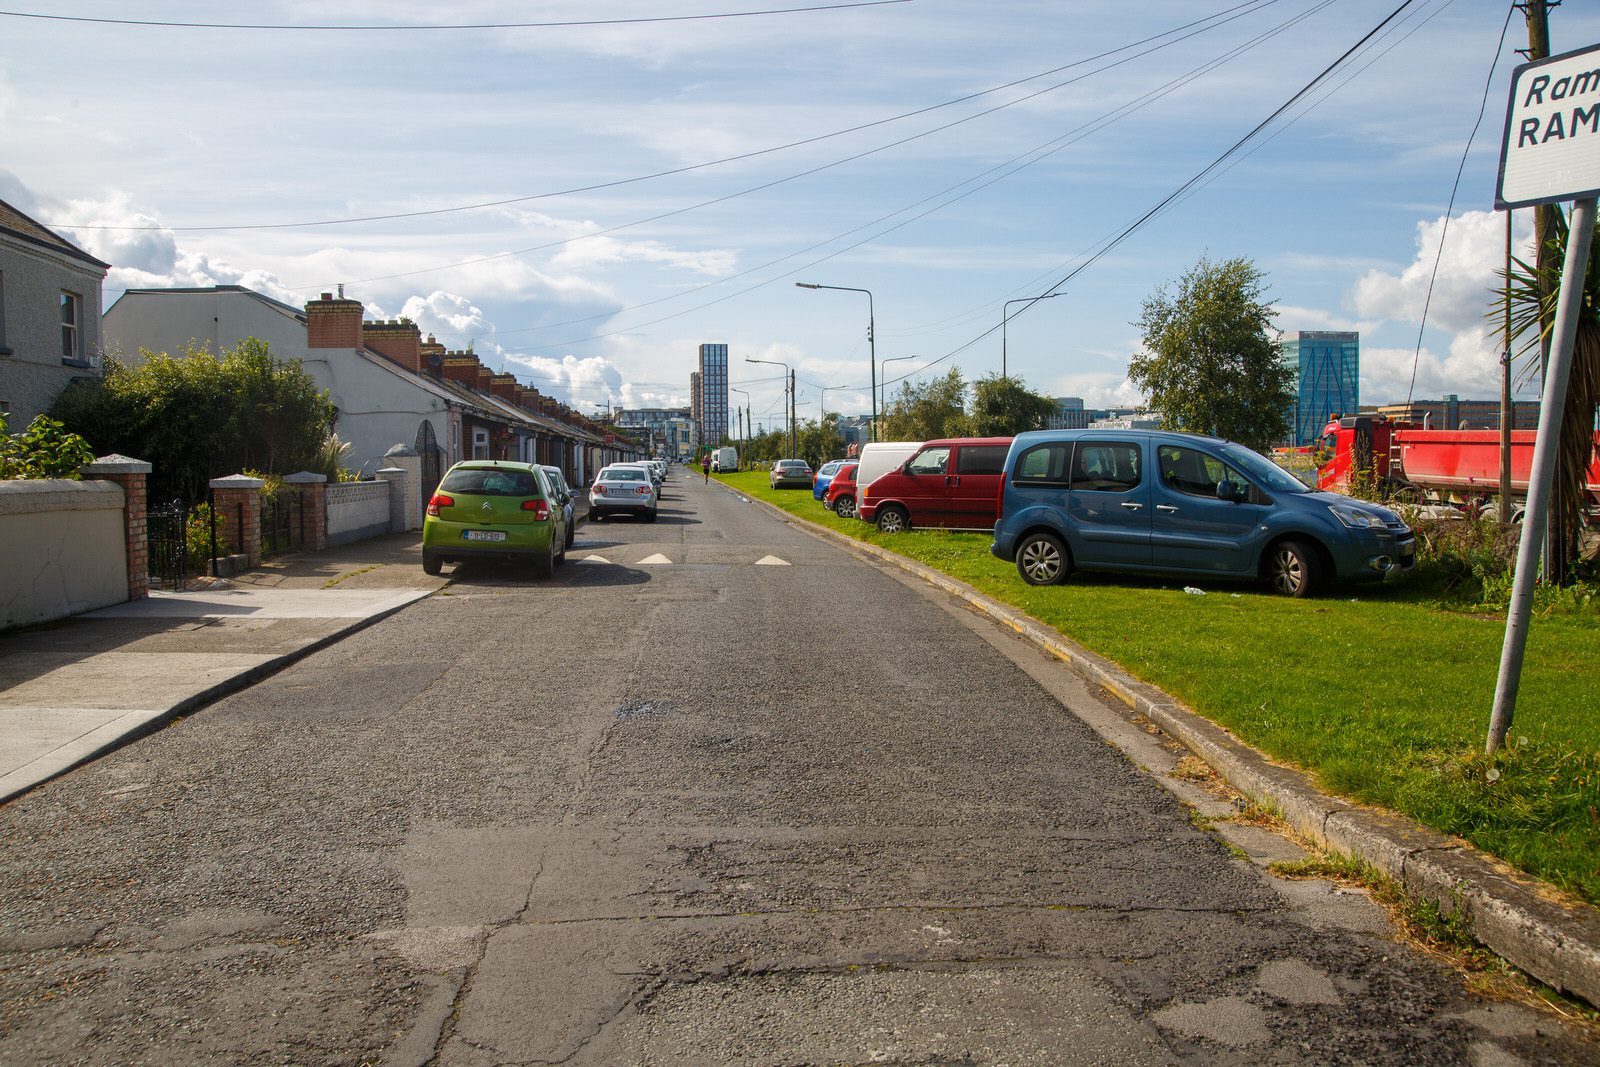 PIGEON HOUSE ROAD IN RINGSEND [IS A COMPLEX OF STREETS RATHER THAN A SINGLE STREET] 010